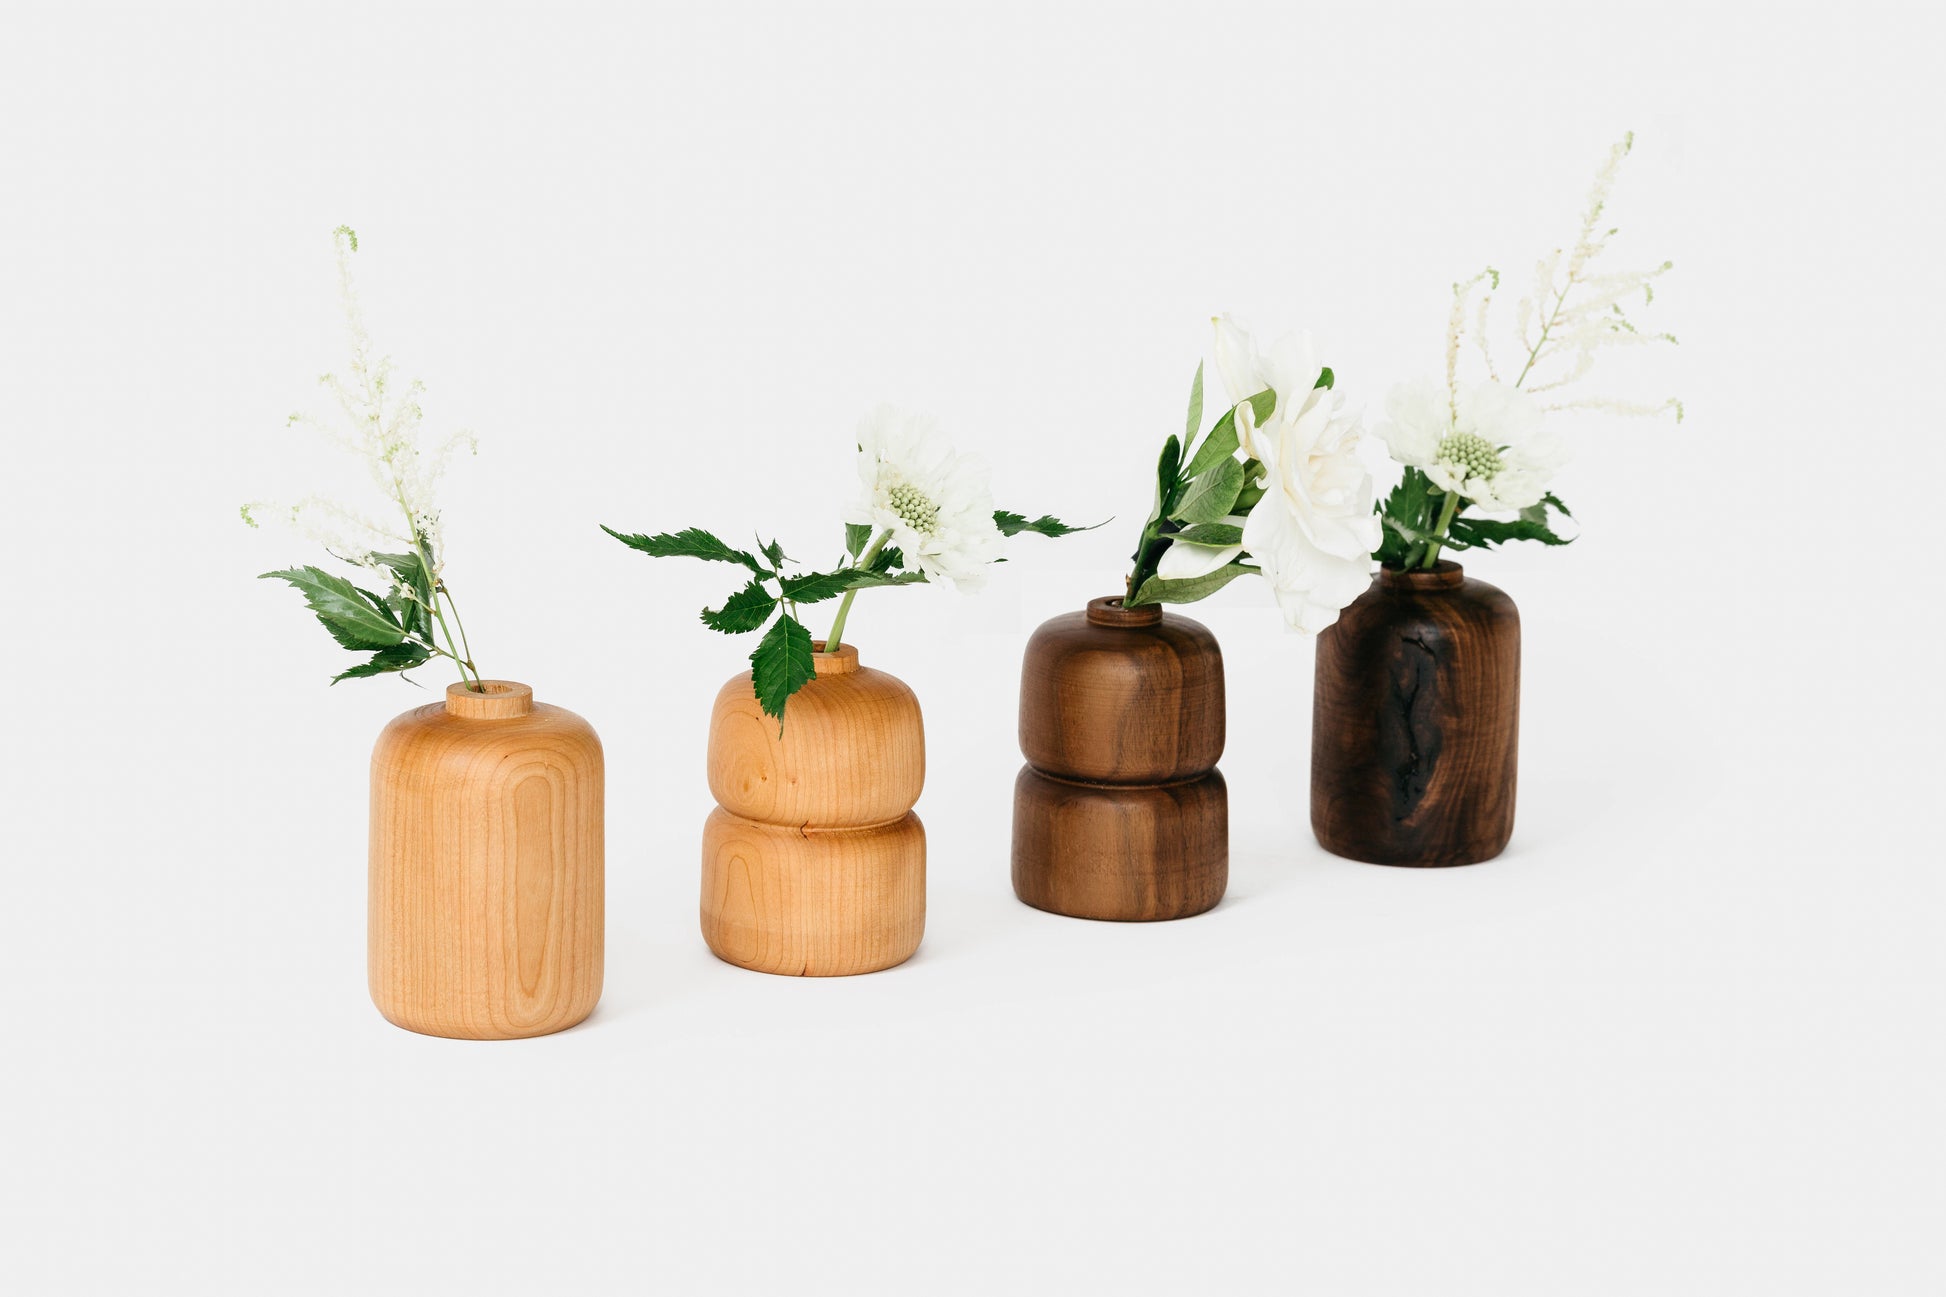 Straight bud and double bud vases shown in cherry and walnut wood. Vases have large white fresh flowers.